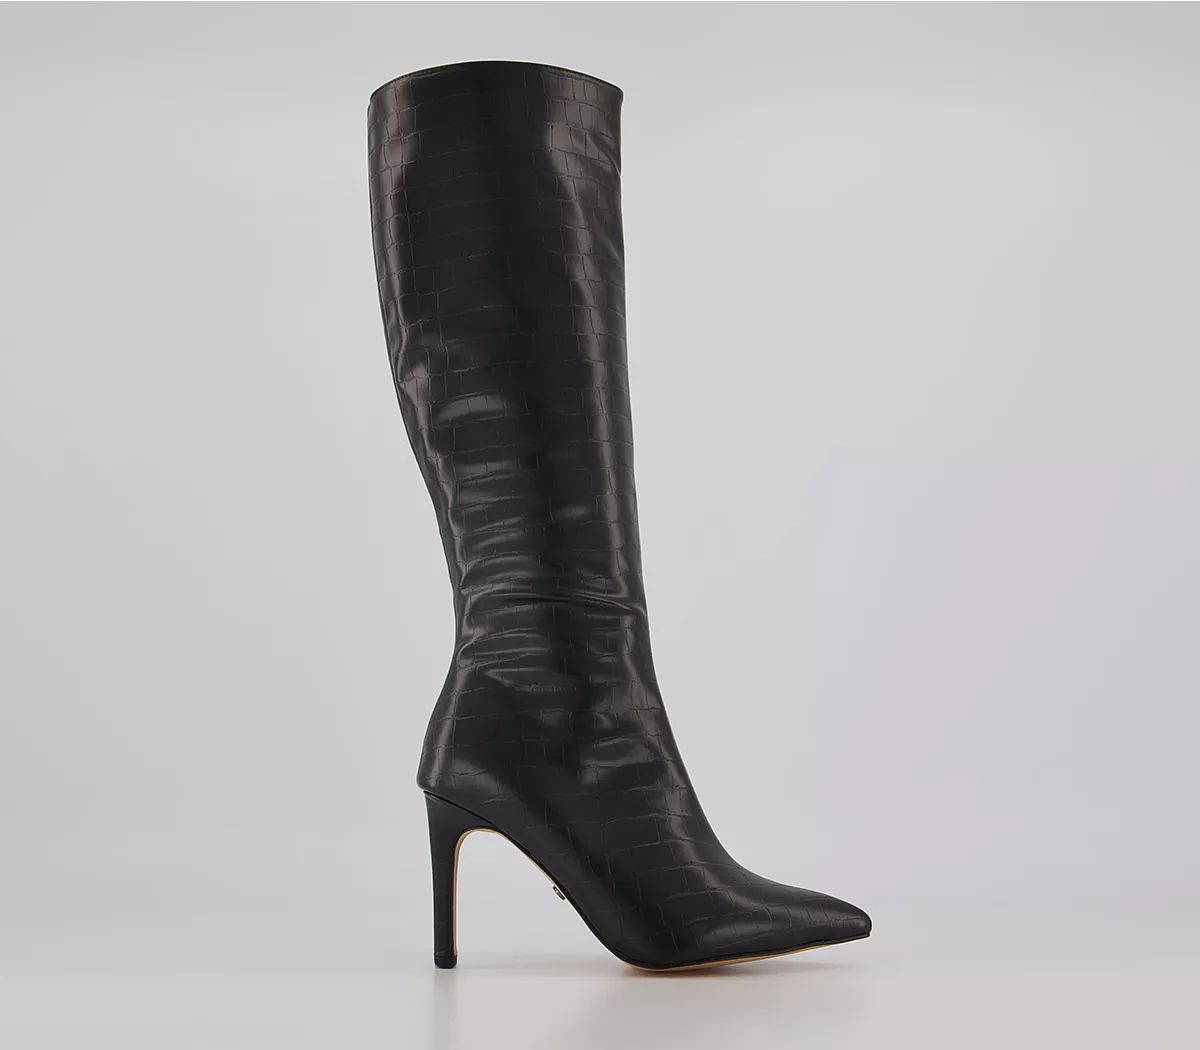 Office
								Knighted Pointed Toe Knee High Heeled Boots
								Black Croc | OFFICE London (UK)